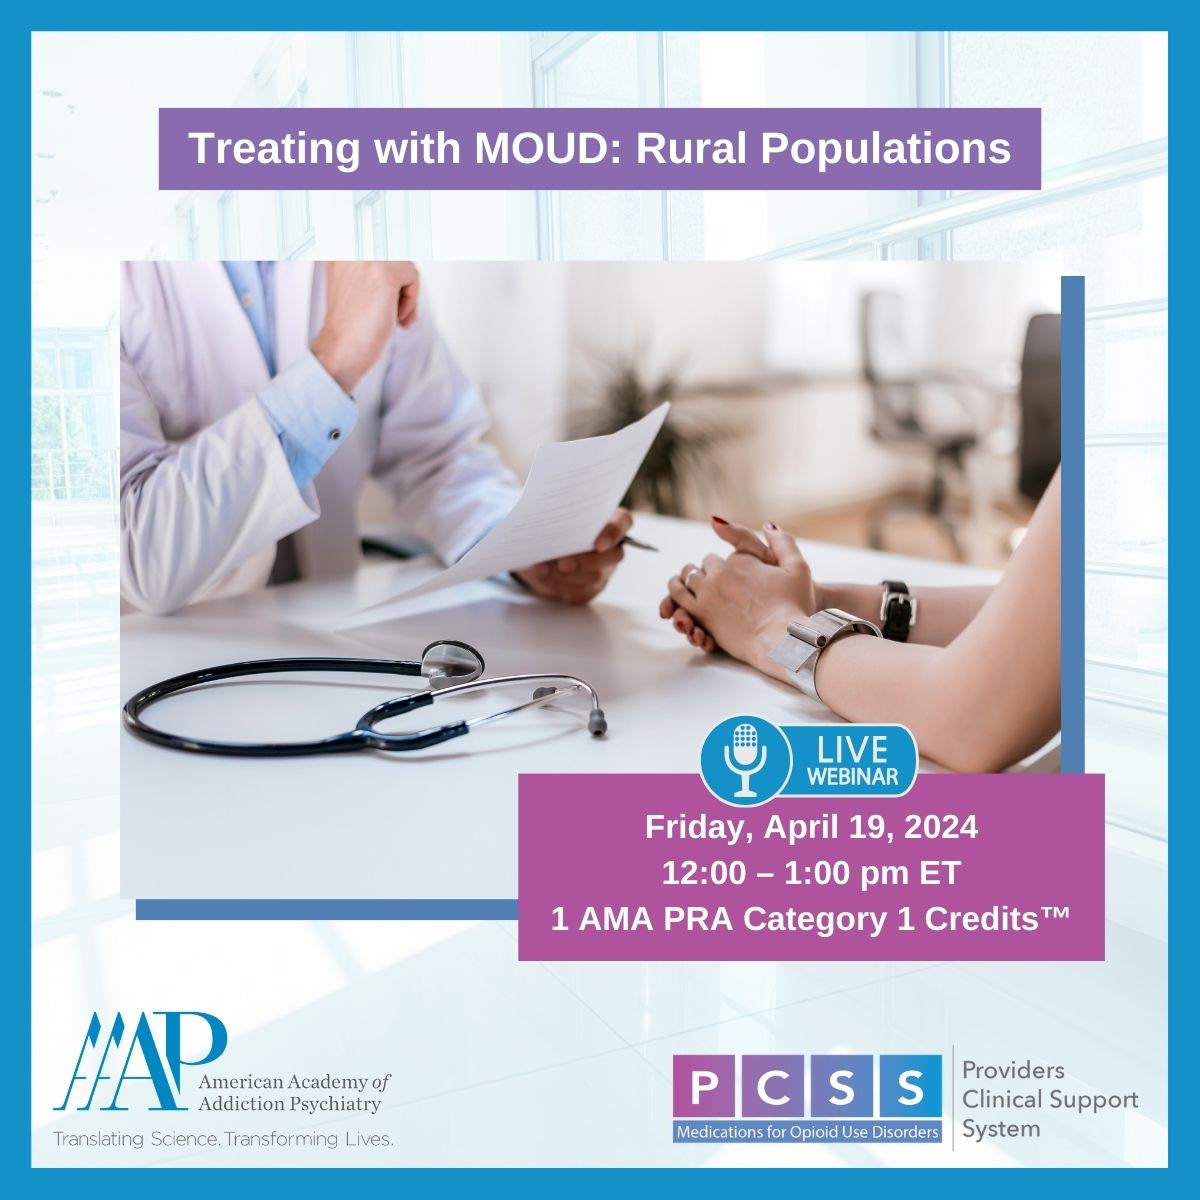 Join Dr. John Brooklyn for the clinical roundtable “Treating with MOUD: Rural Populations” this Friday, 4/19, from 12:00 - 1:00 pm ET. Register: bit.ly/4aztgpv @PCSSMOUD